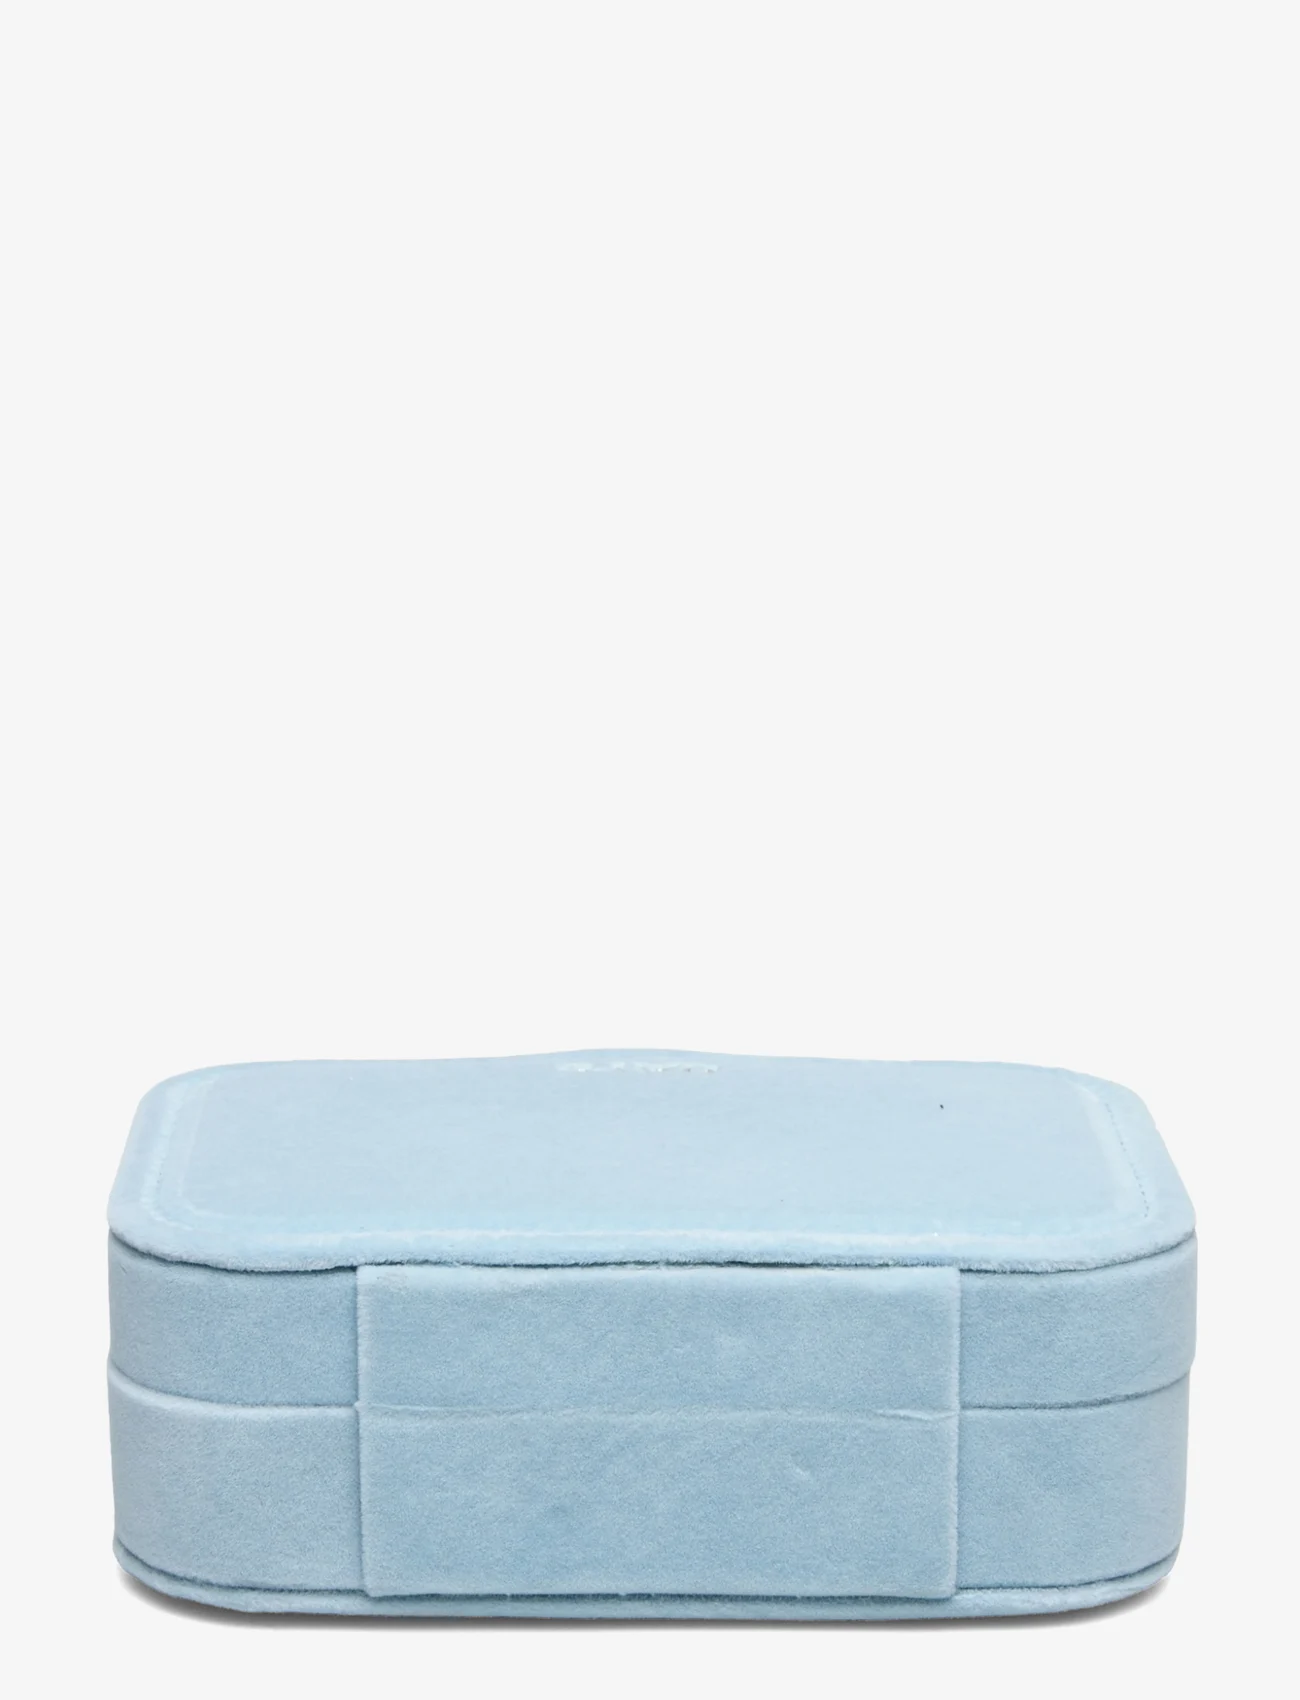 DAY ET - Day Jewelry Box - cashmere blue - 1